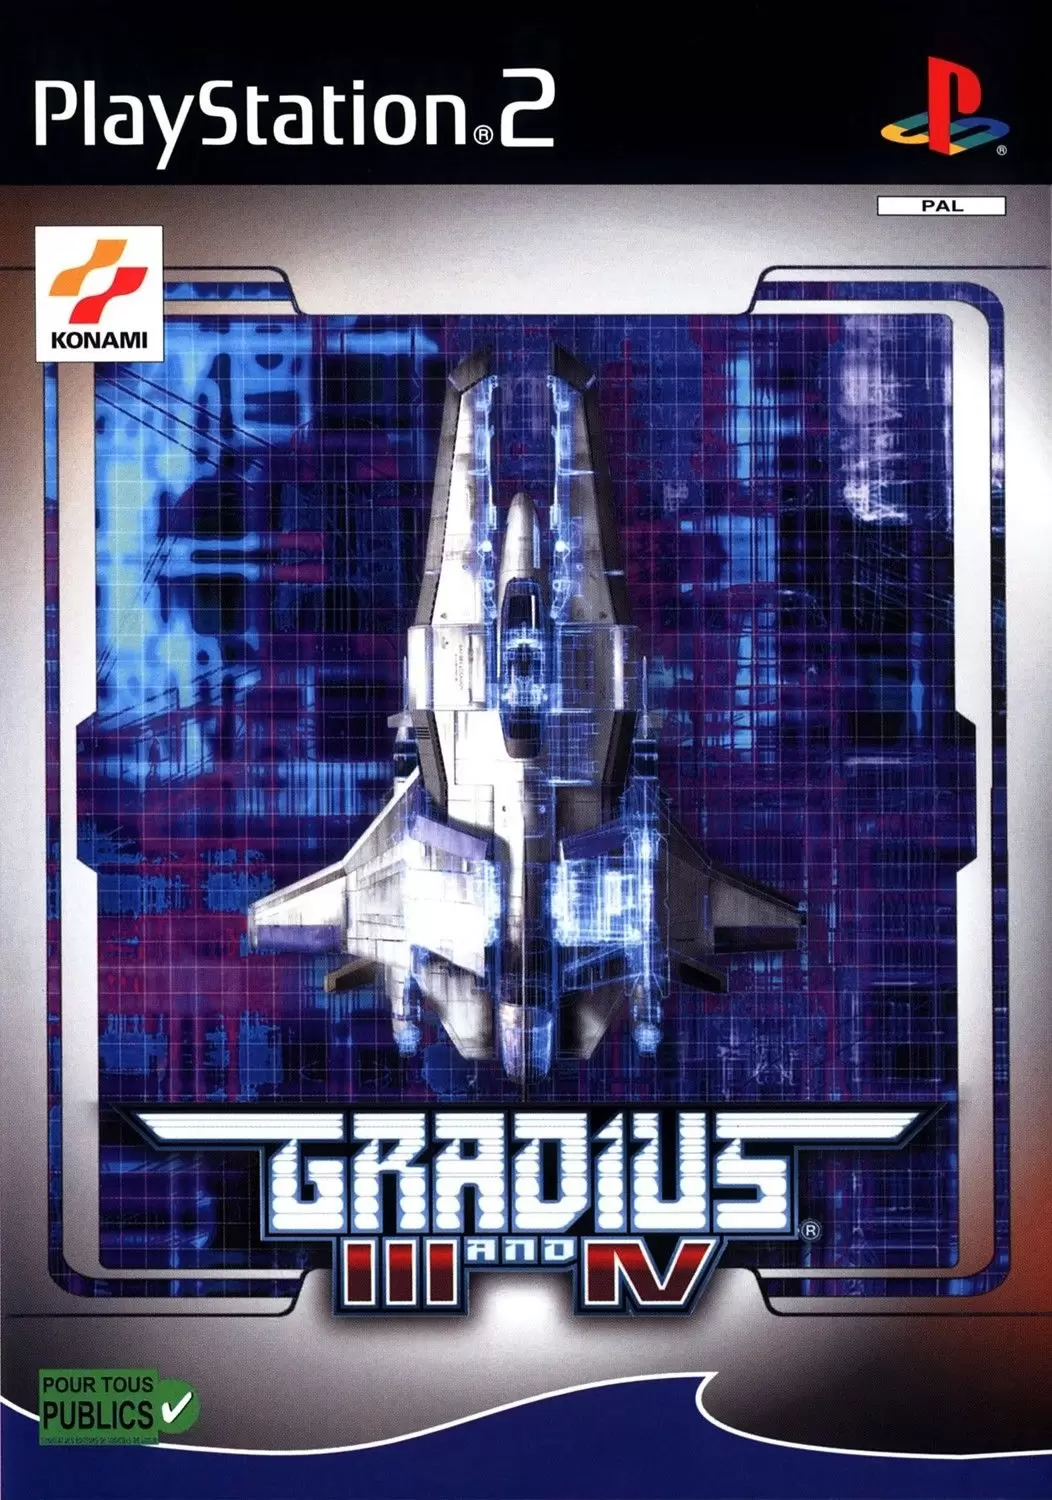 Jeux PS2 - Gradius III and IV